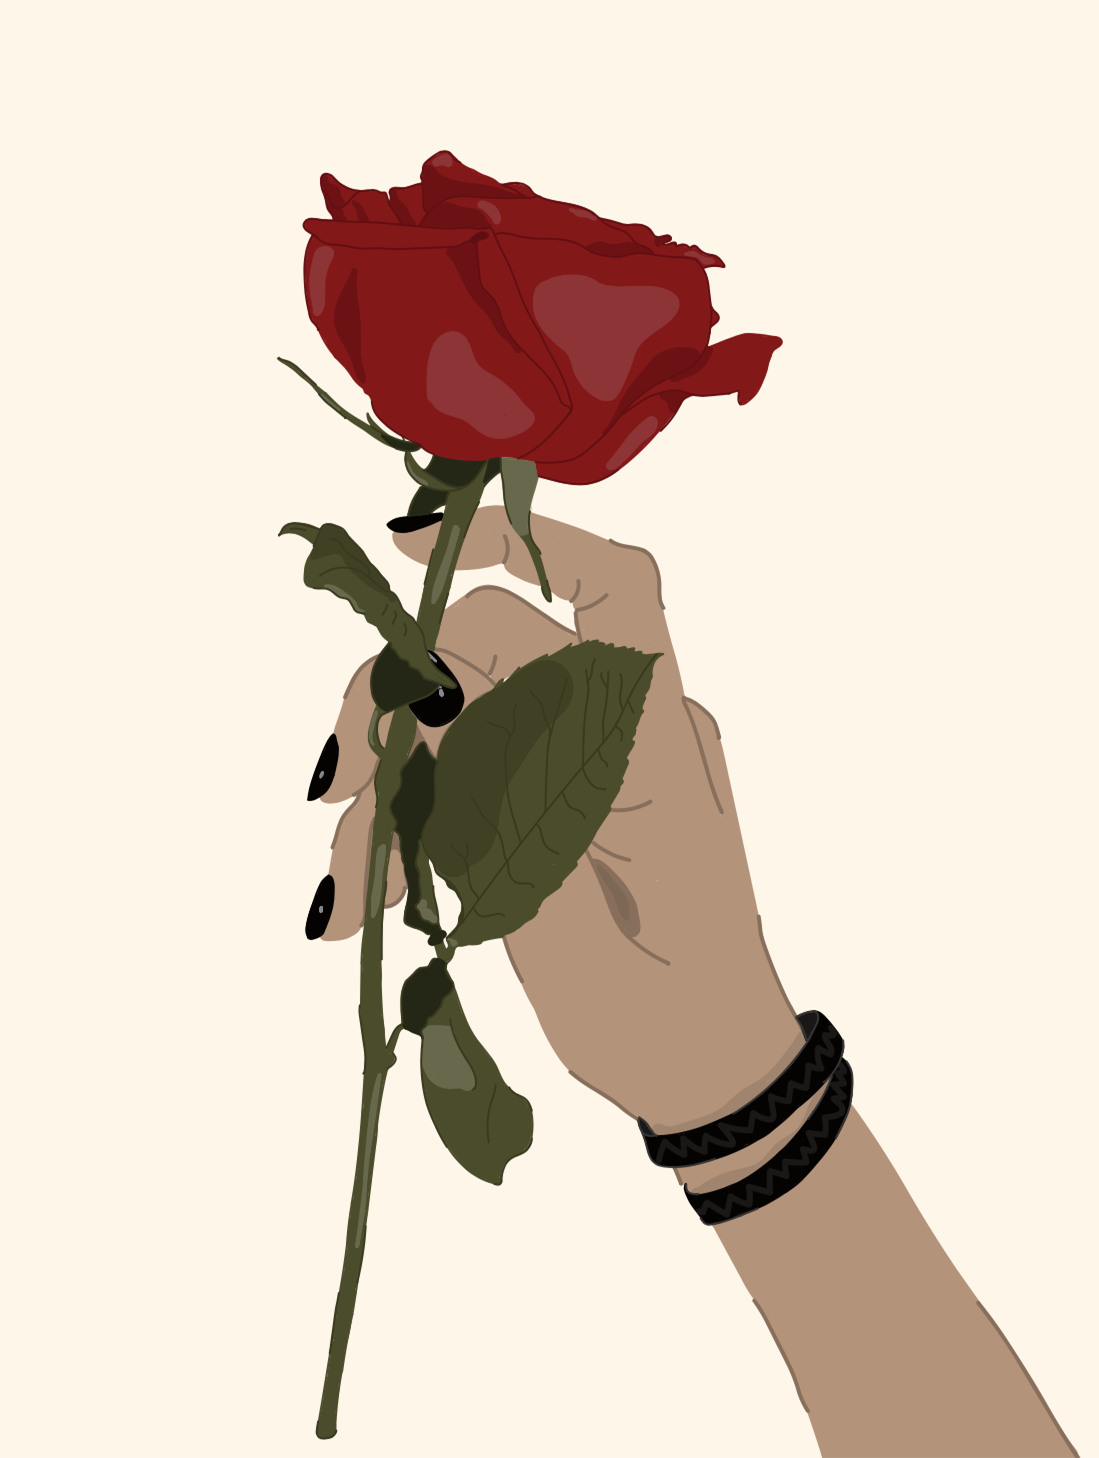 Drawling of a hand holding a rose.